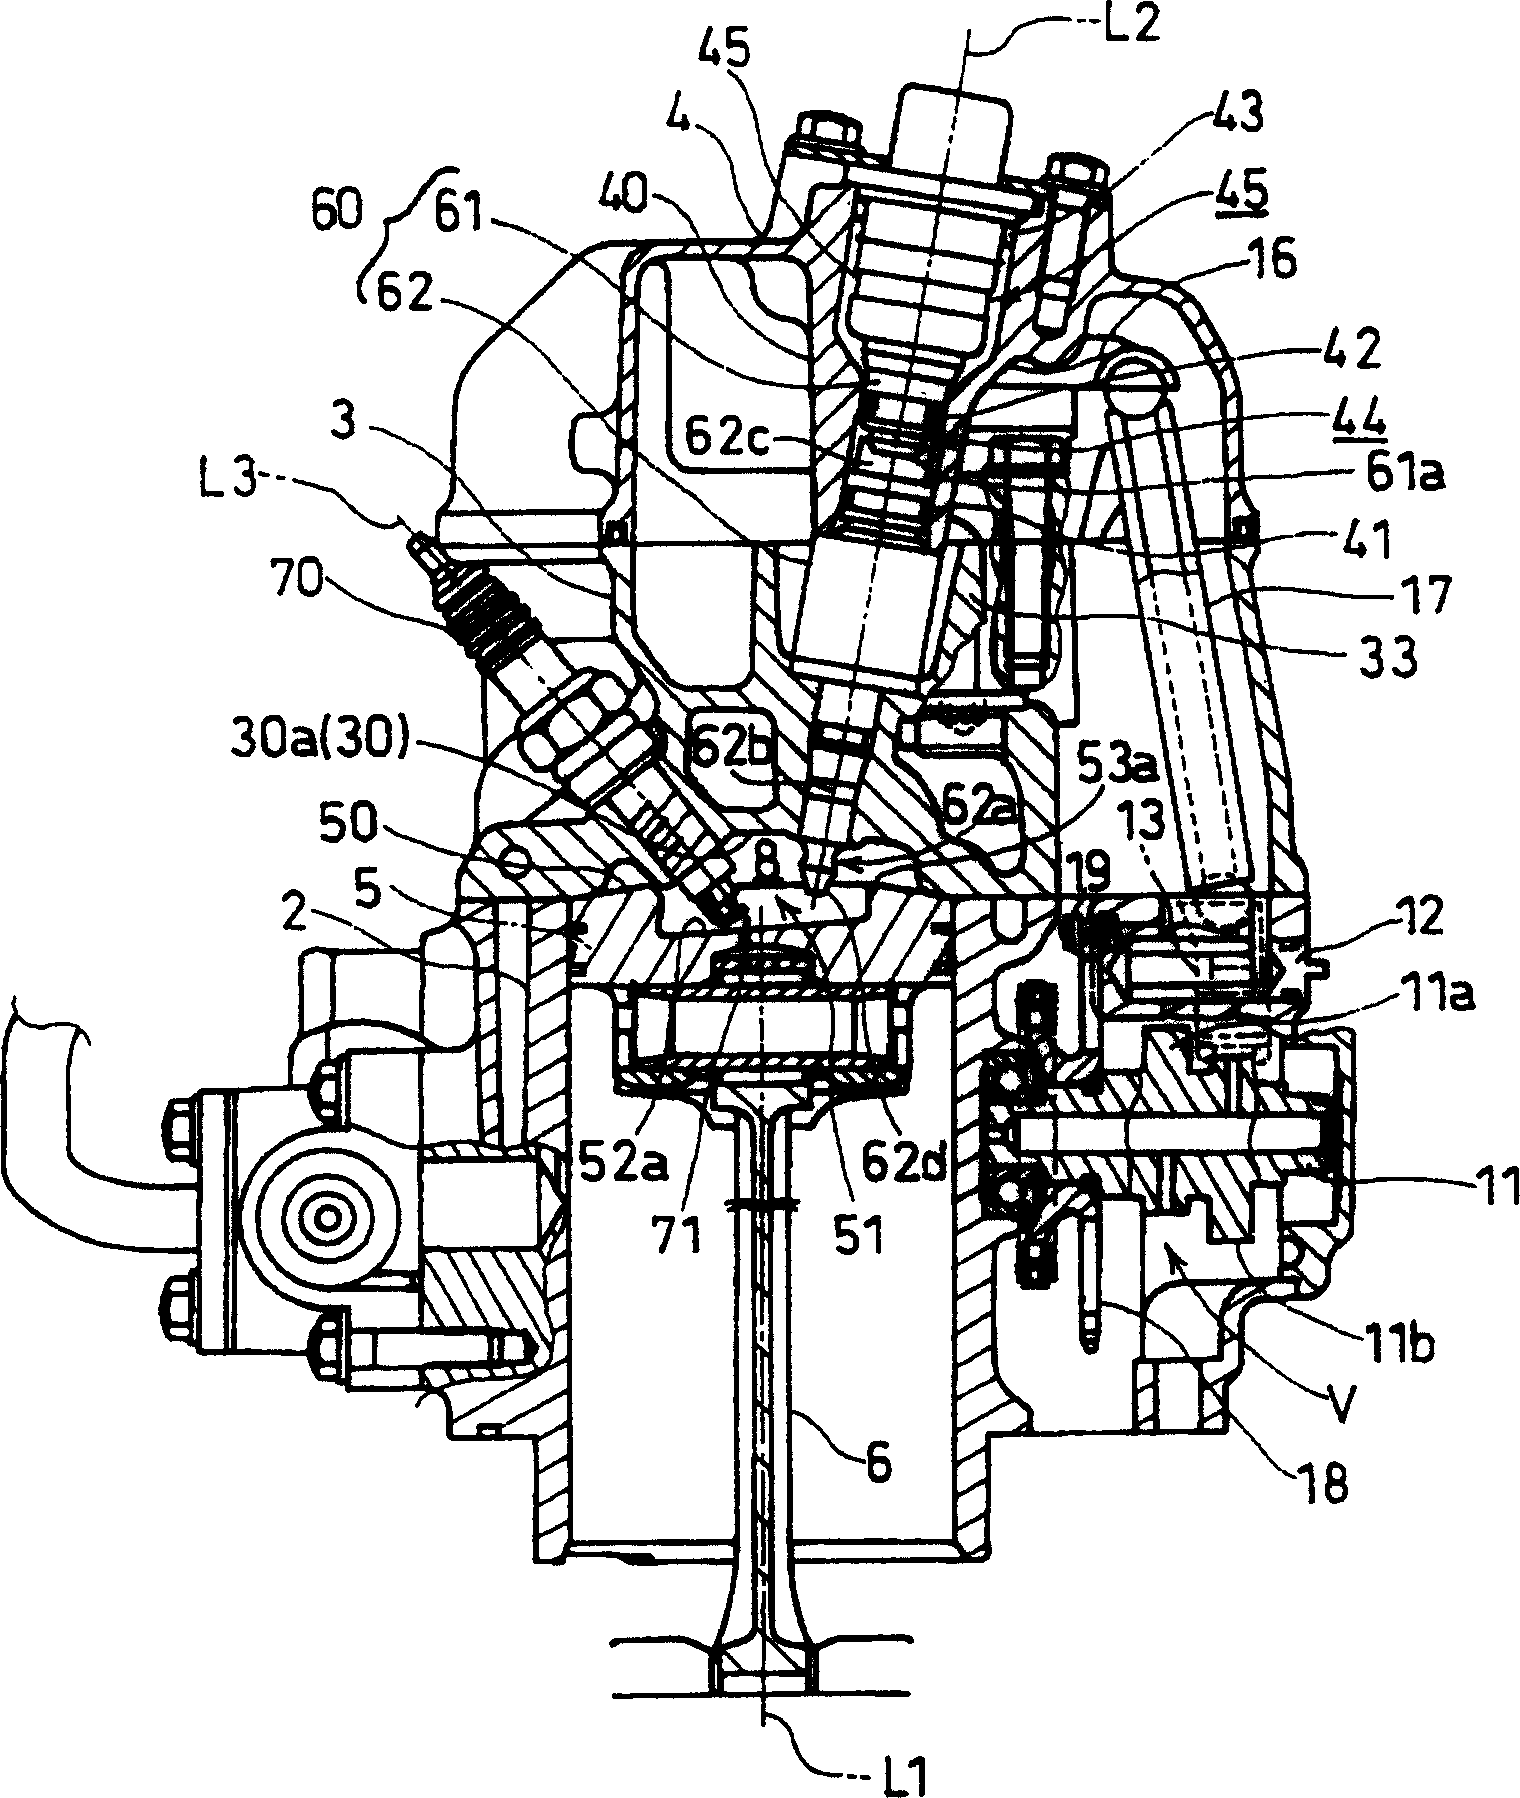 In cylinder fuel oil jet type IC engine